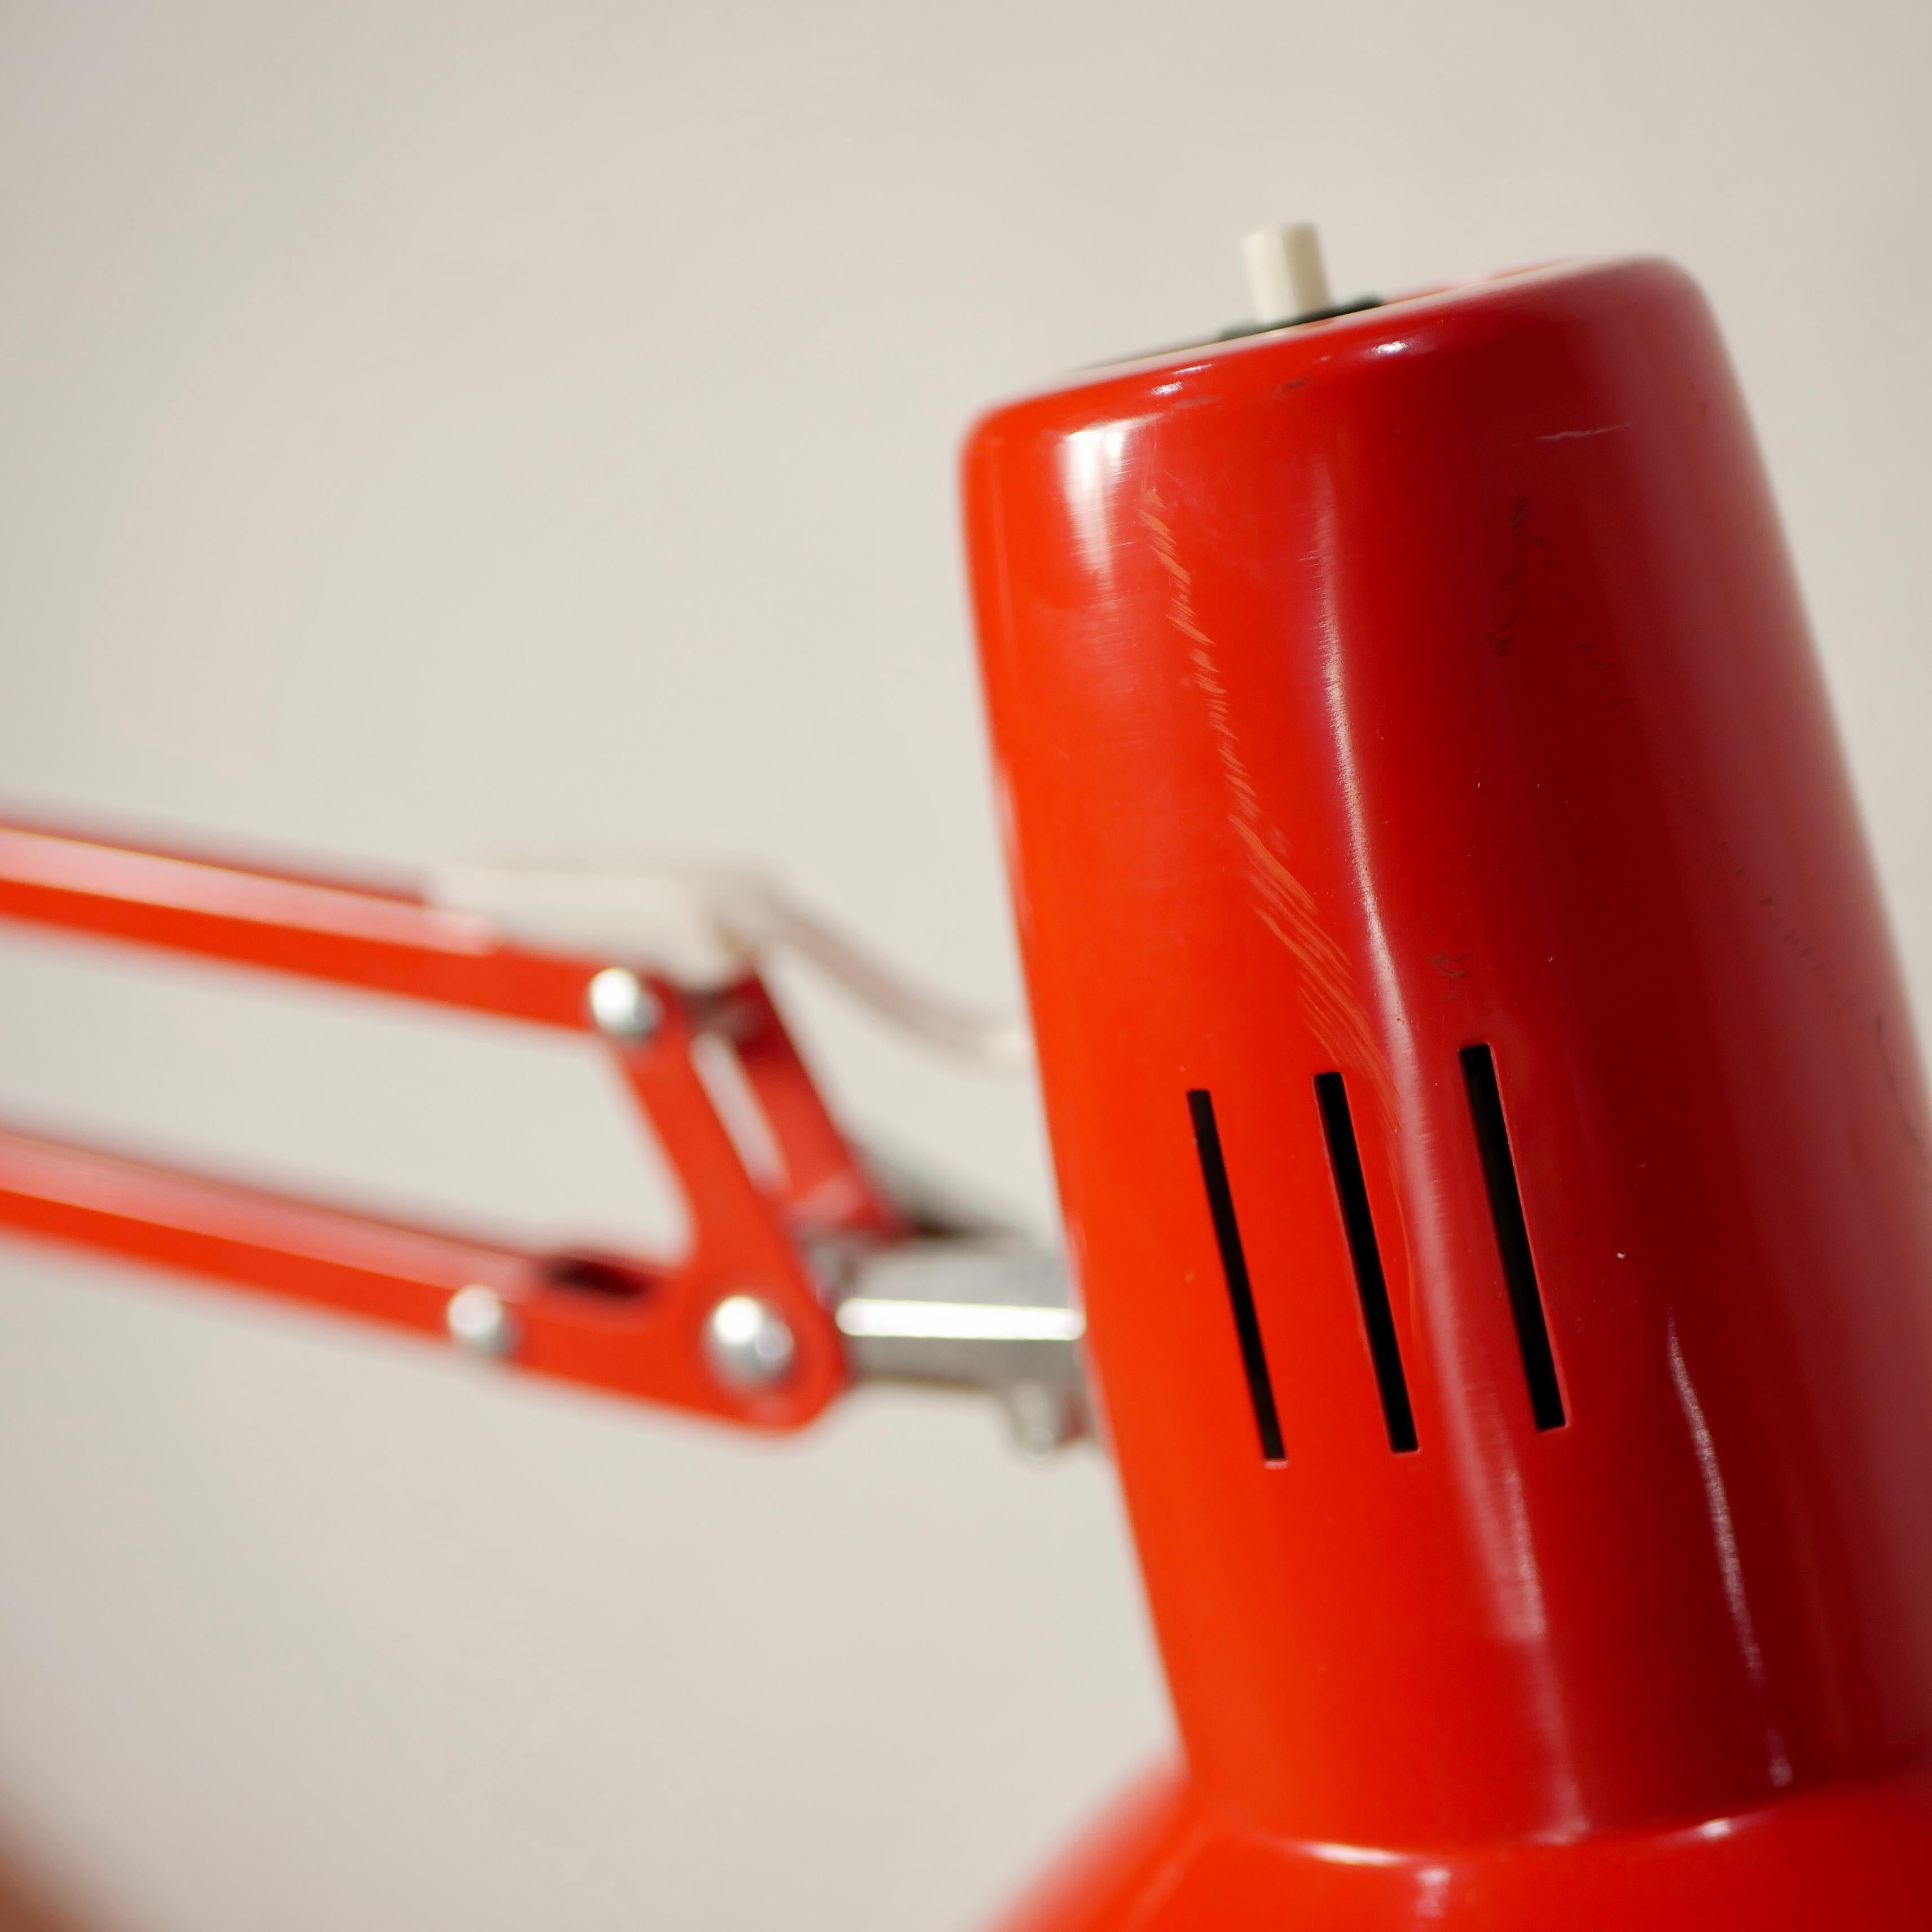 Red Articulated Desk Lamp by Ledu, Made in, France 1